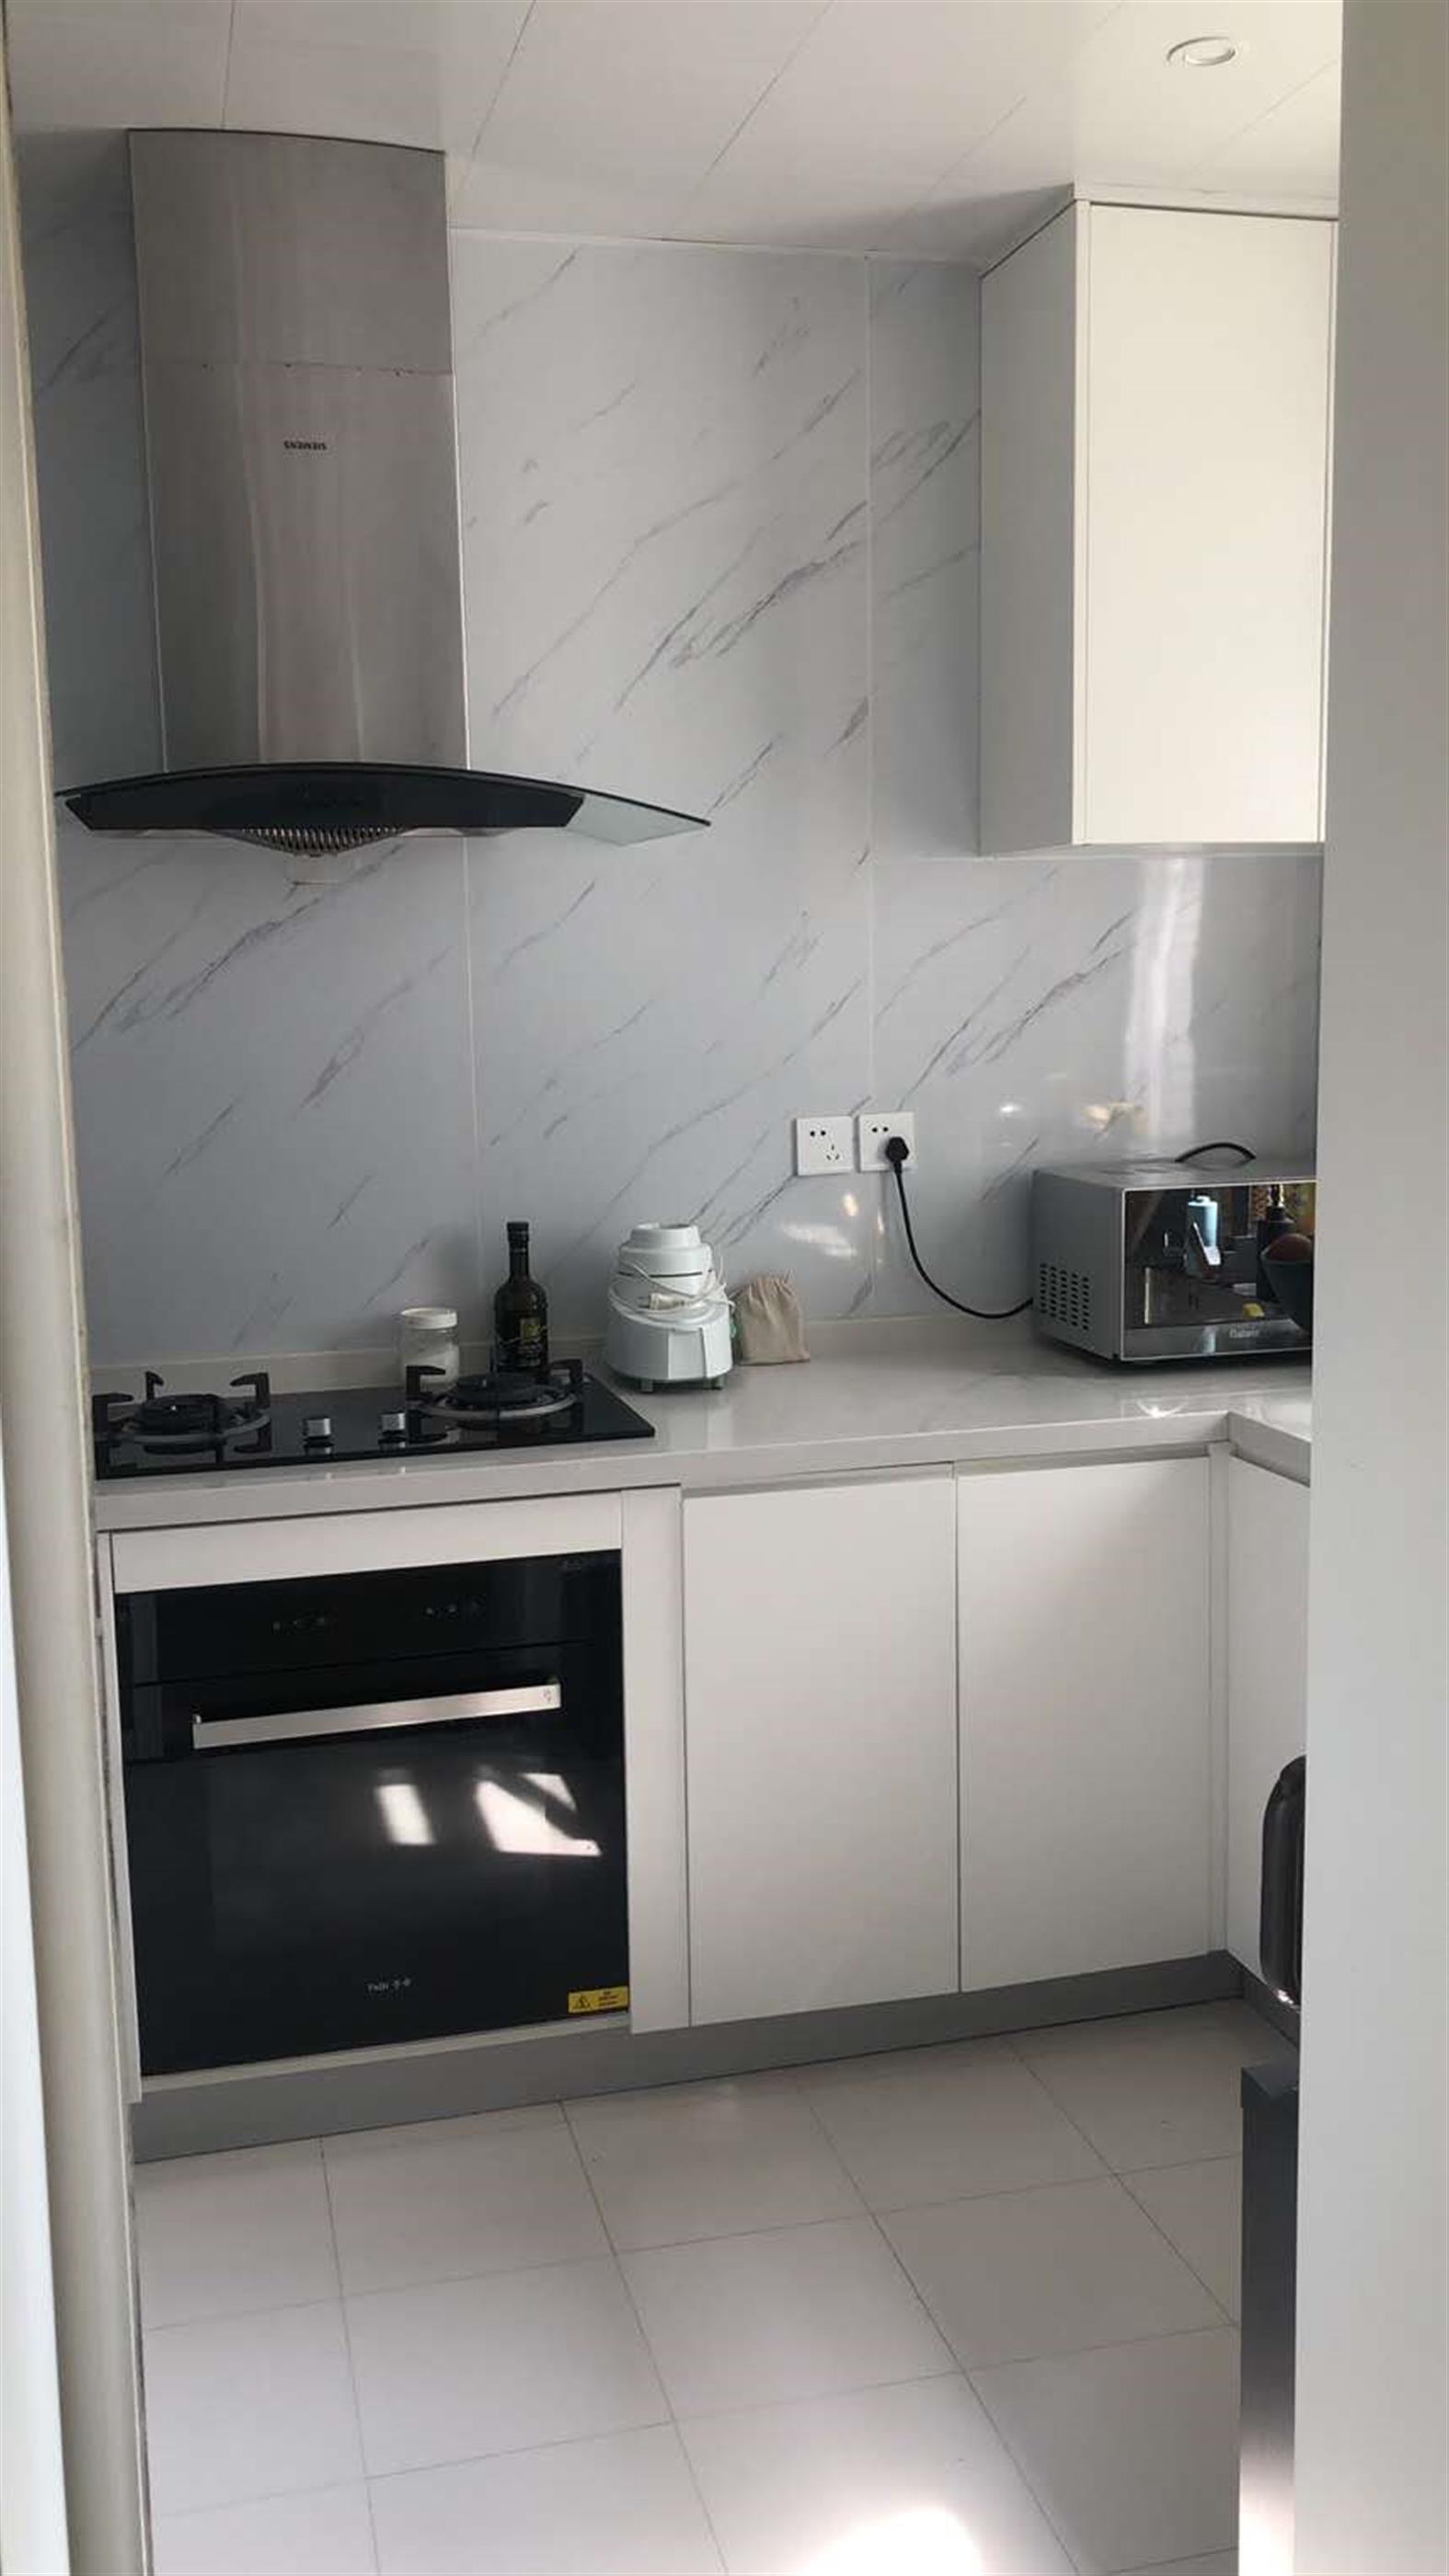 new kitchen Convenient Newly-Renovated 2BR FFC Xinghua Rd Apt Nr LN 10/11 for Rent in Shanghai